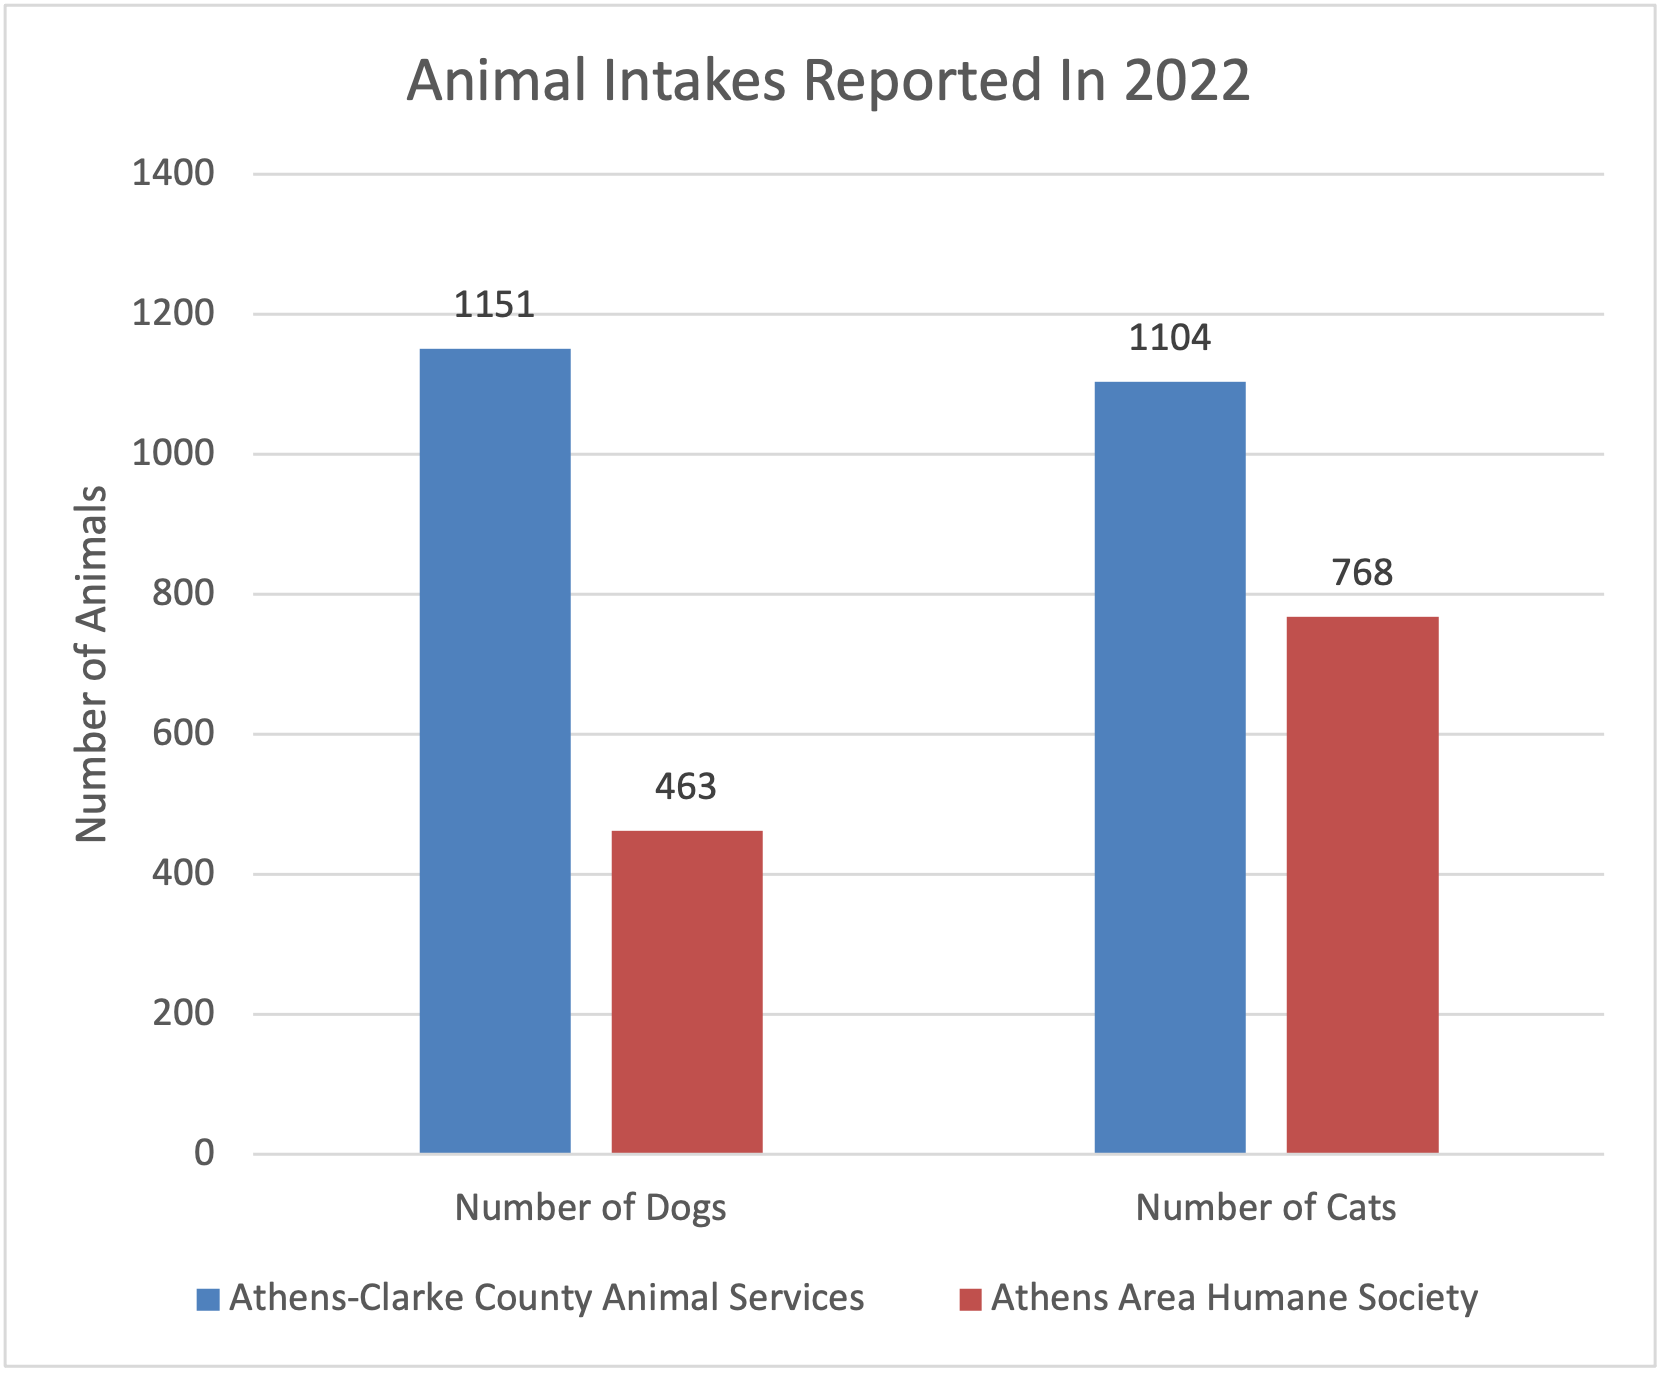 A chart that shows the number of animal intakes reported by Athens-Clarke County Animals Services and Athens Area Humane Society in 2022. Animals Services reported 1151 dogs and 1104 cats while Athens Area Humane Society reported 463 dogs and 768 cats.